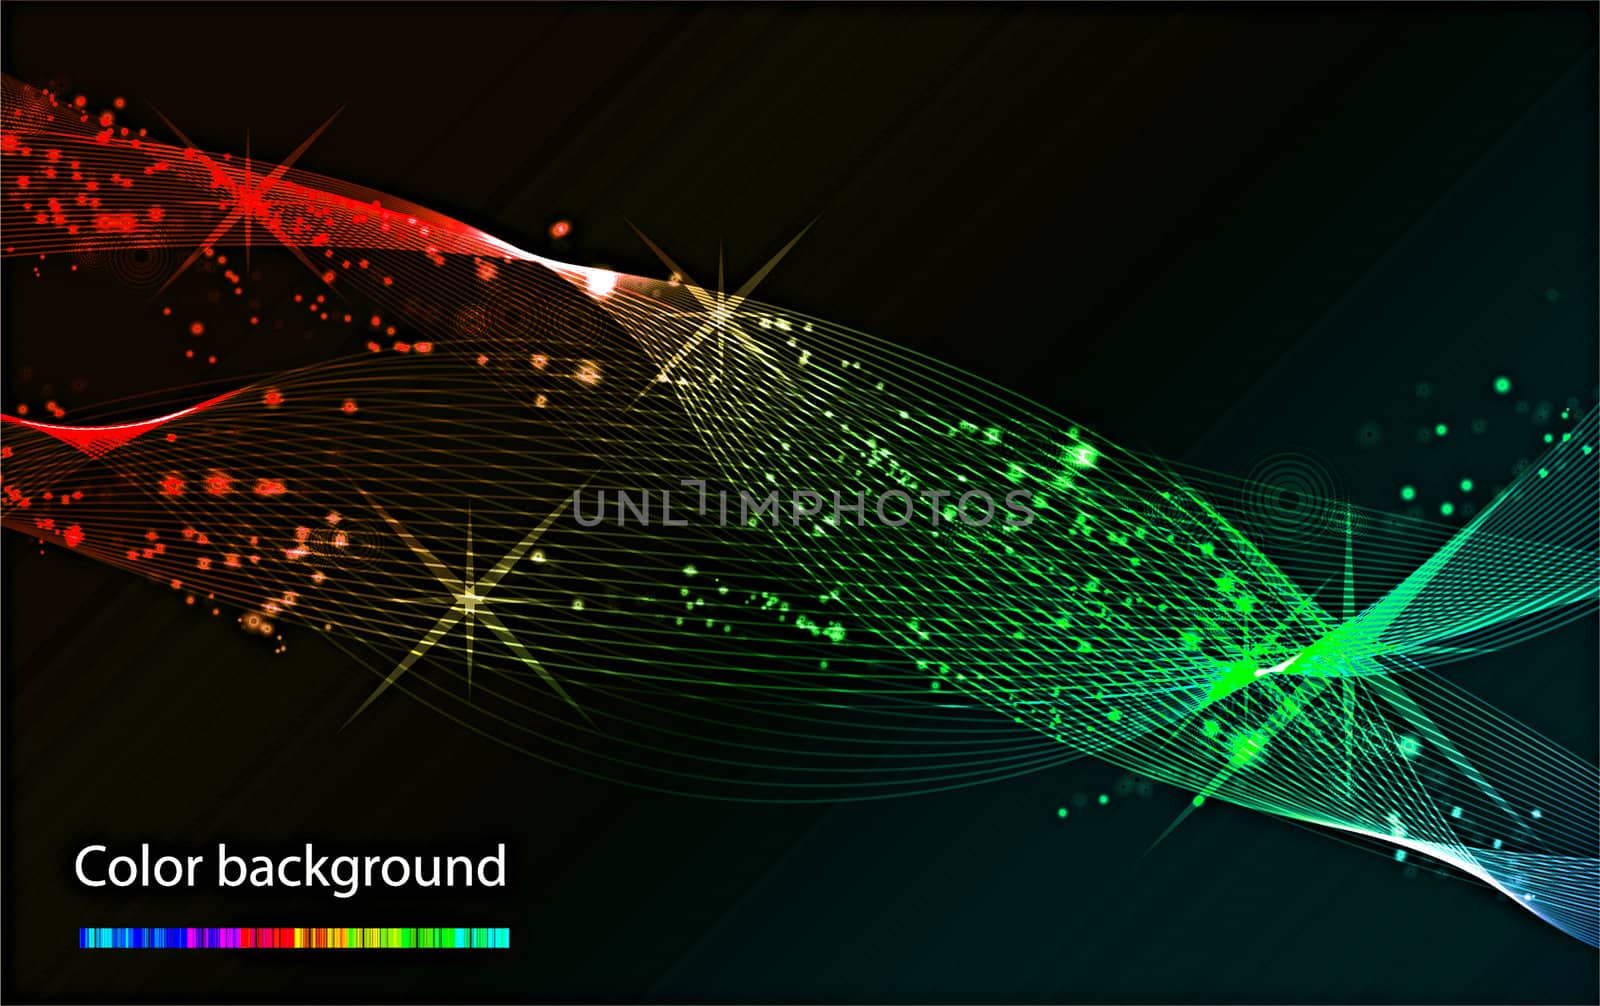 Beautiful abstract colorful background illustration for design